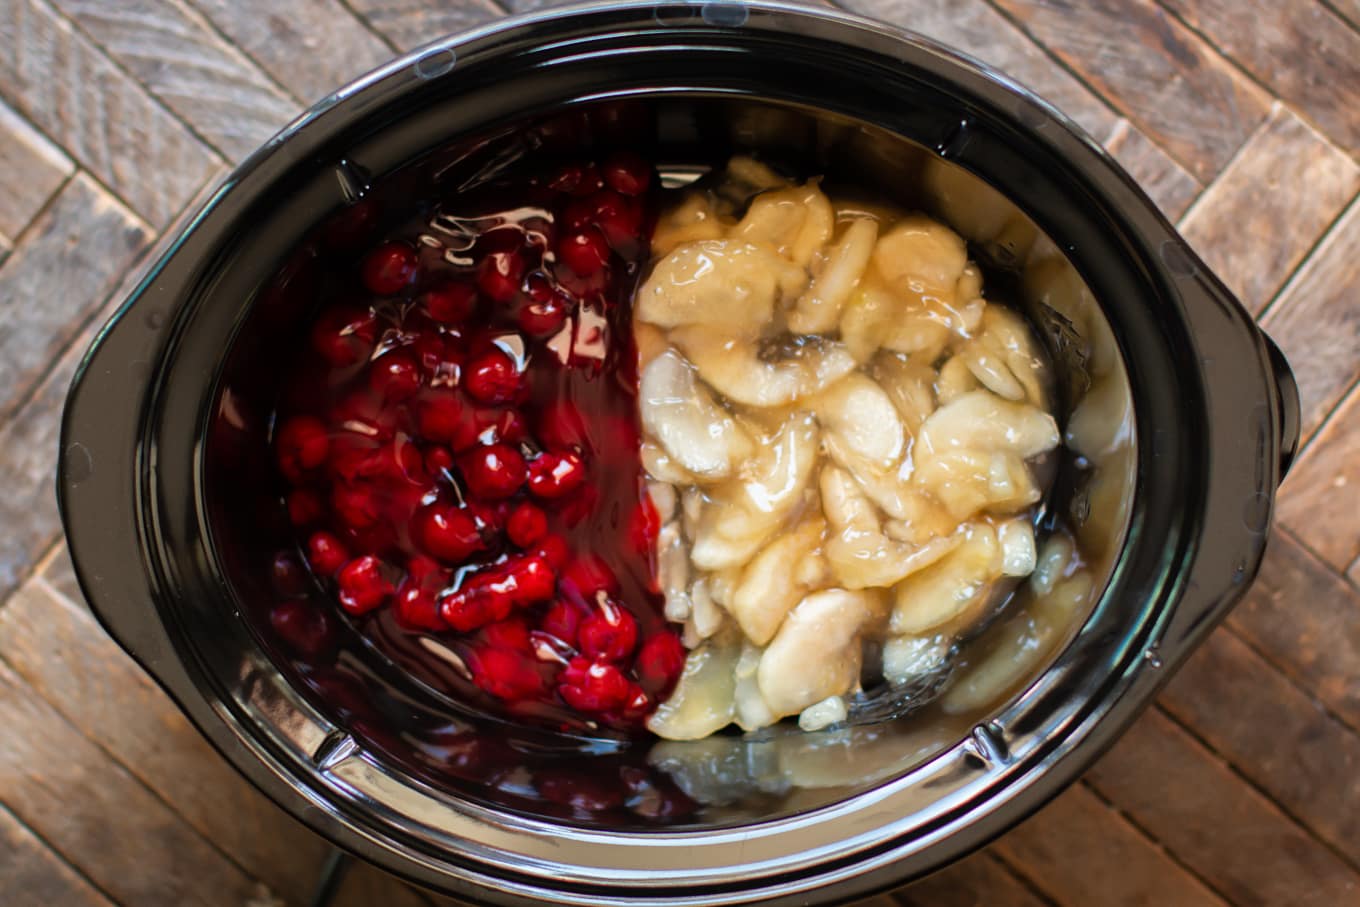 Cherry pie filling on one side of slow cooker and apple pie filling on the other side.